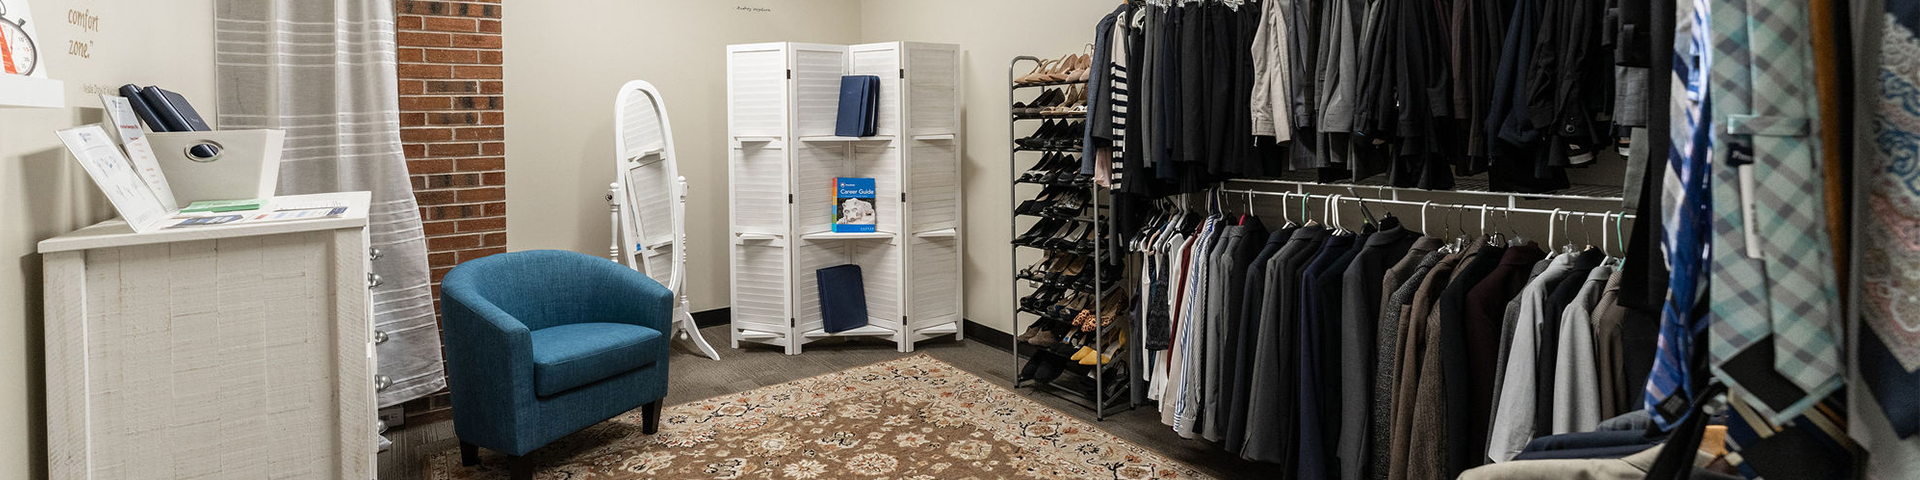 Rack of clothing including suits and ties in a room with a blue chair and white cabinets.